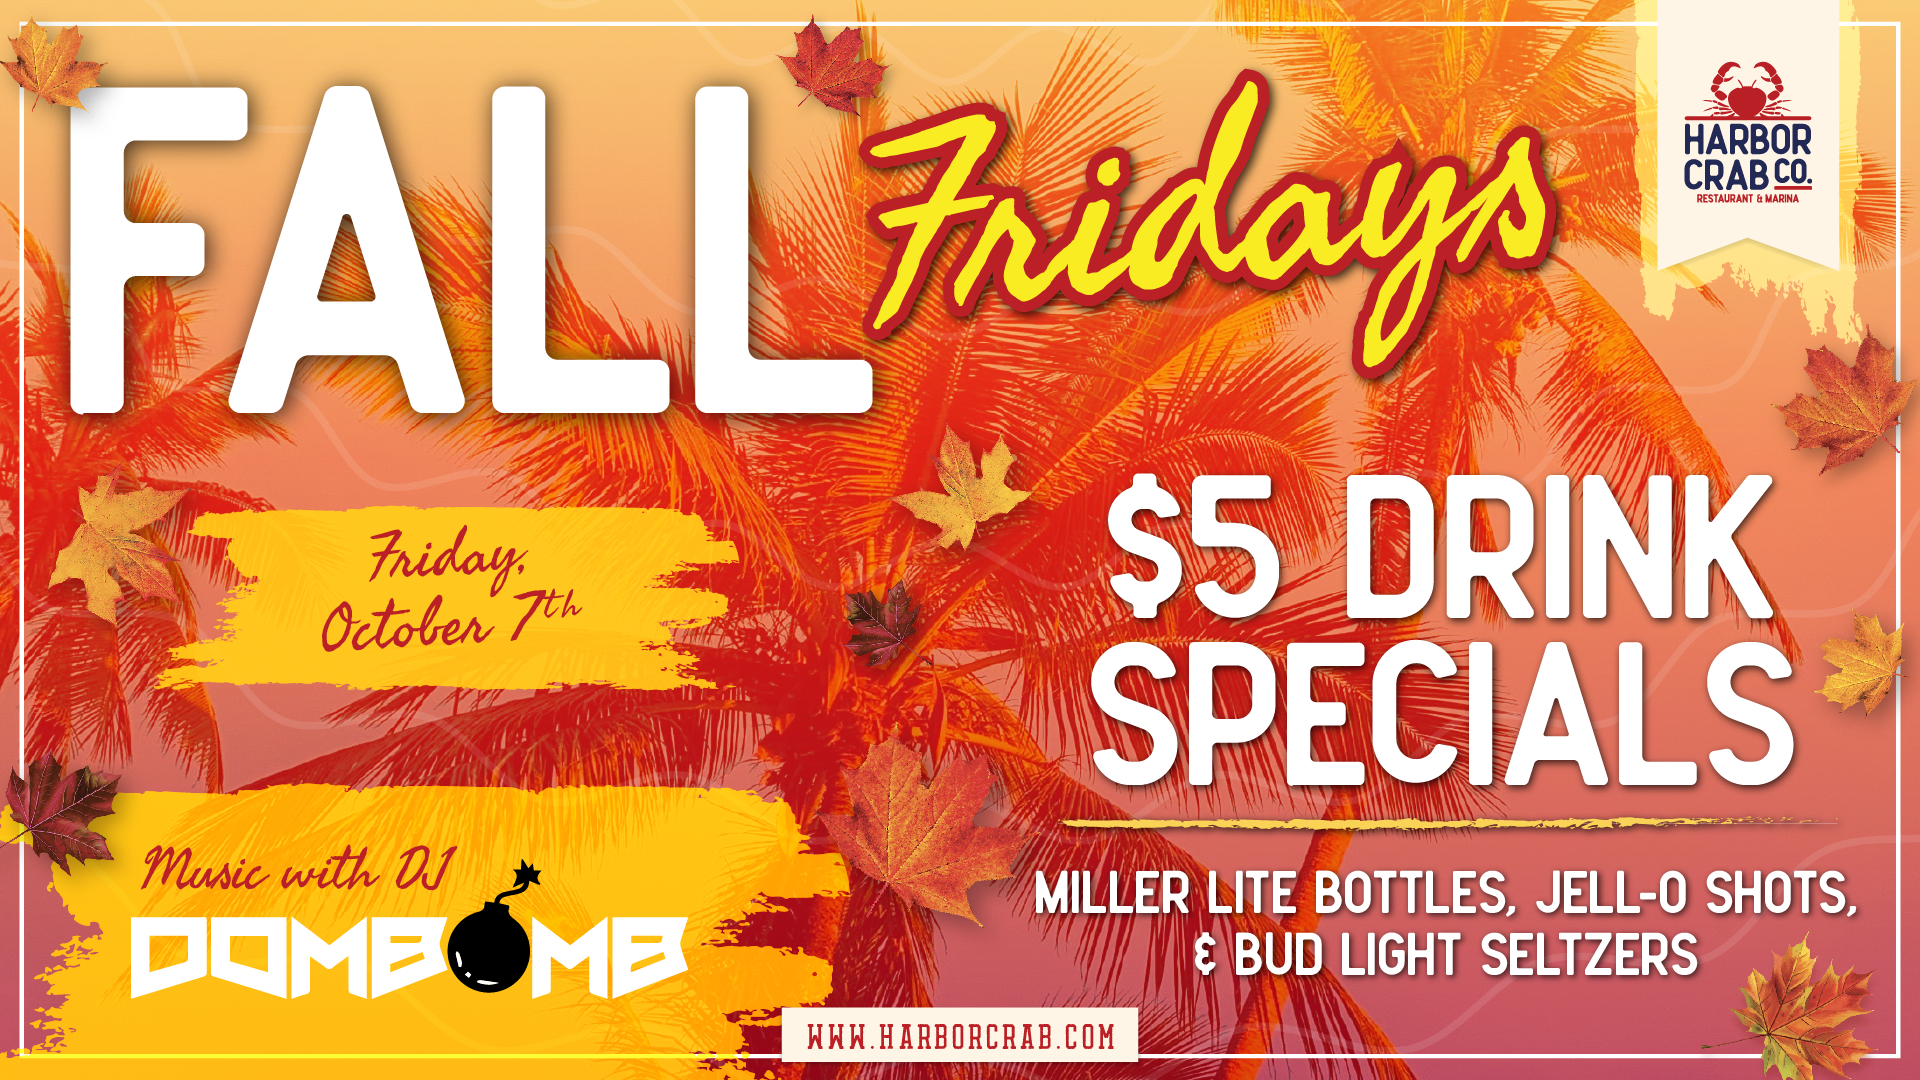 Flyer for Fall Friday on Oct 7th